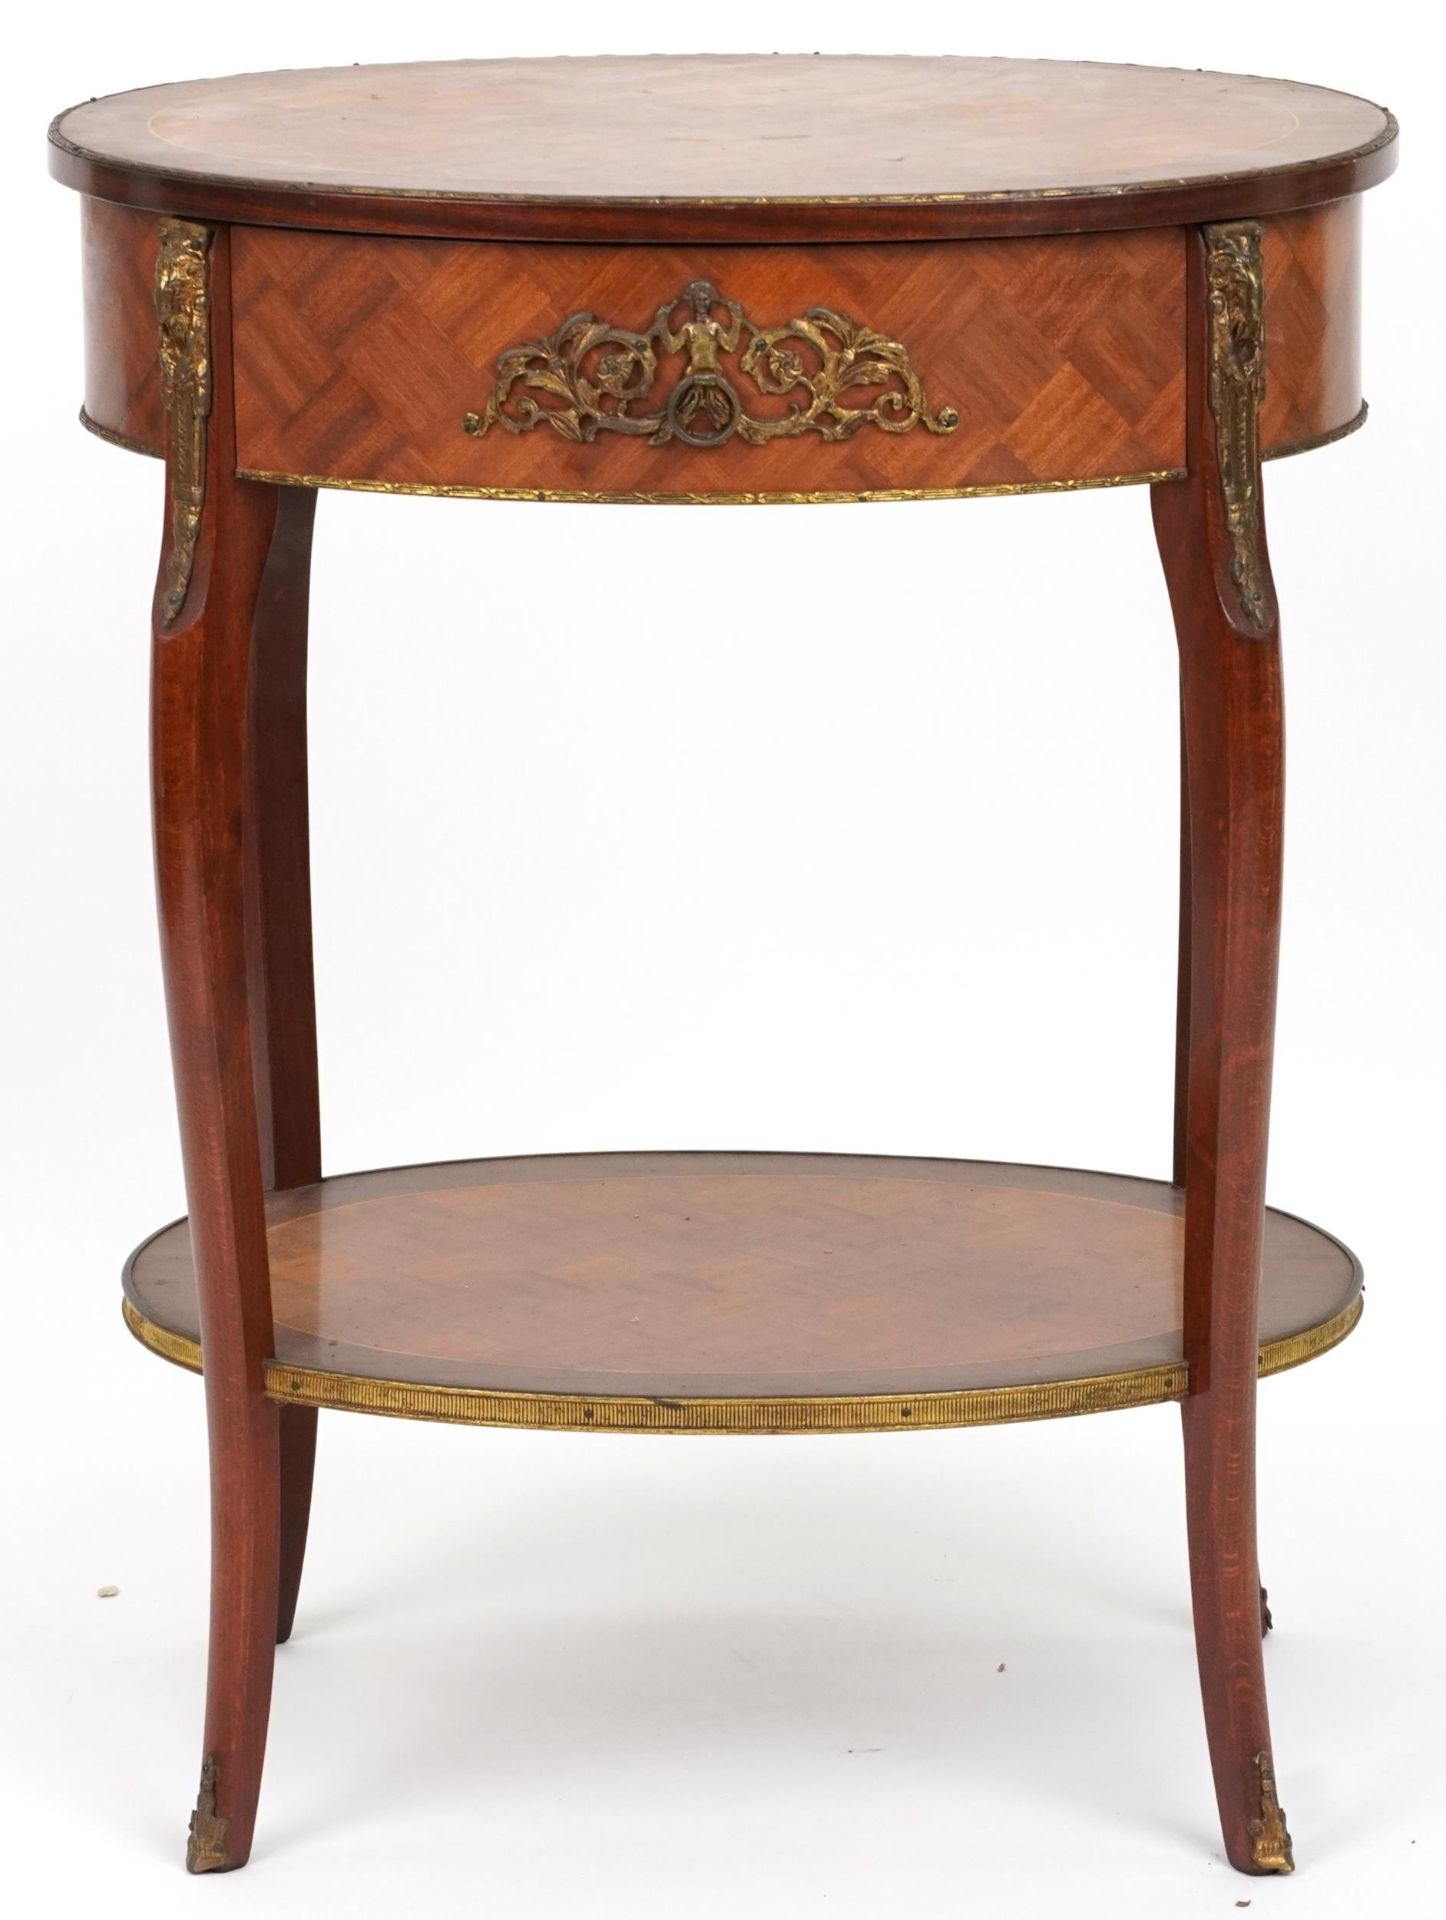 French Louis XV style oval inlaid kingwood side table with gilt metal mounts, frieze drawer and - Image 2 of 5